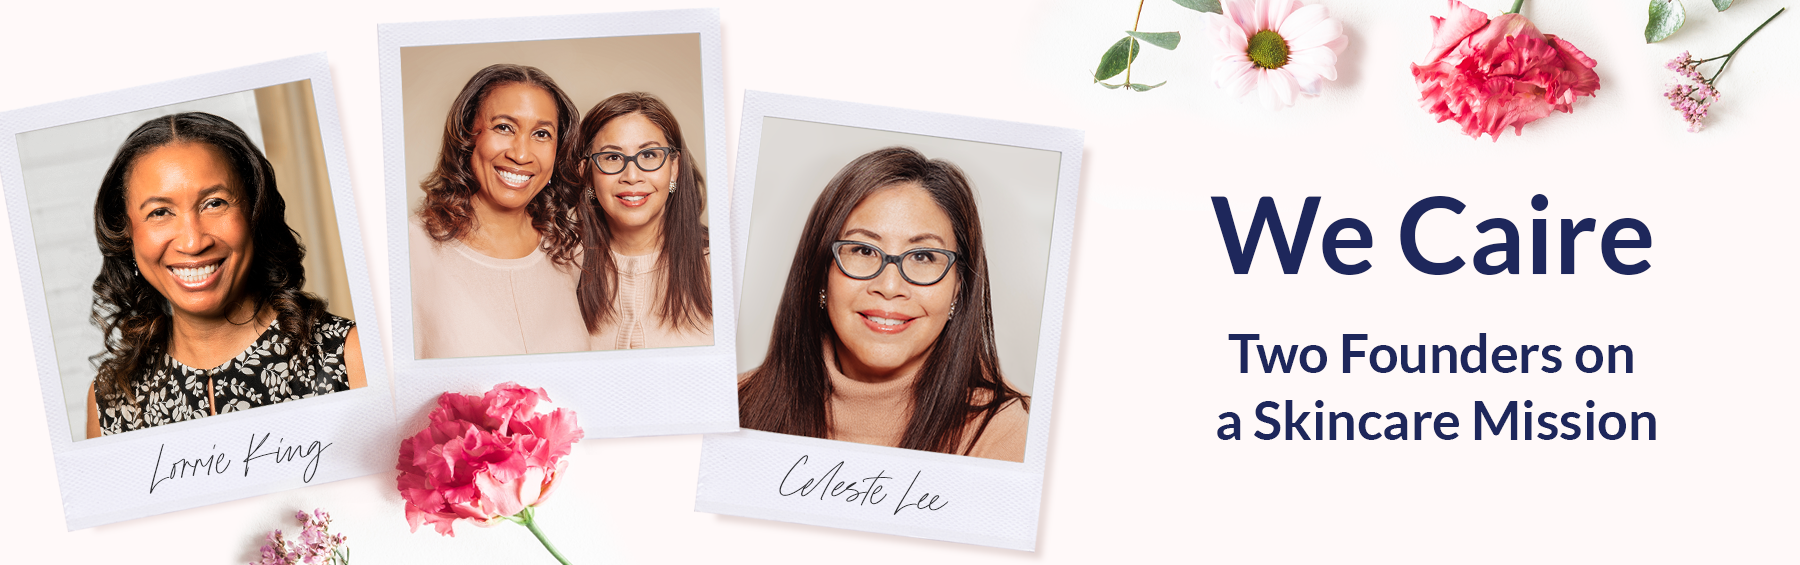 Lorrie King & Celeste lee Founders and Women of Color who are on a skincare mission to improve skin health that has been deteriorated due to hormone decline and menopause